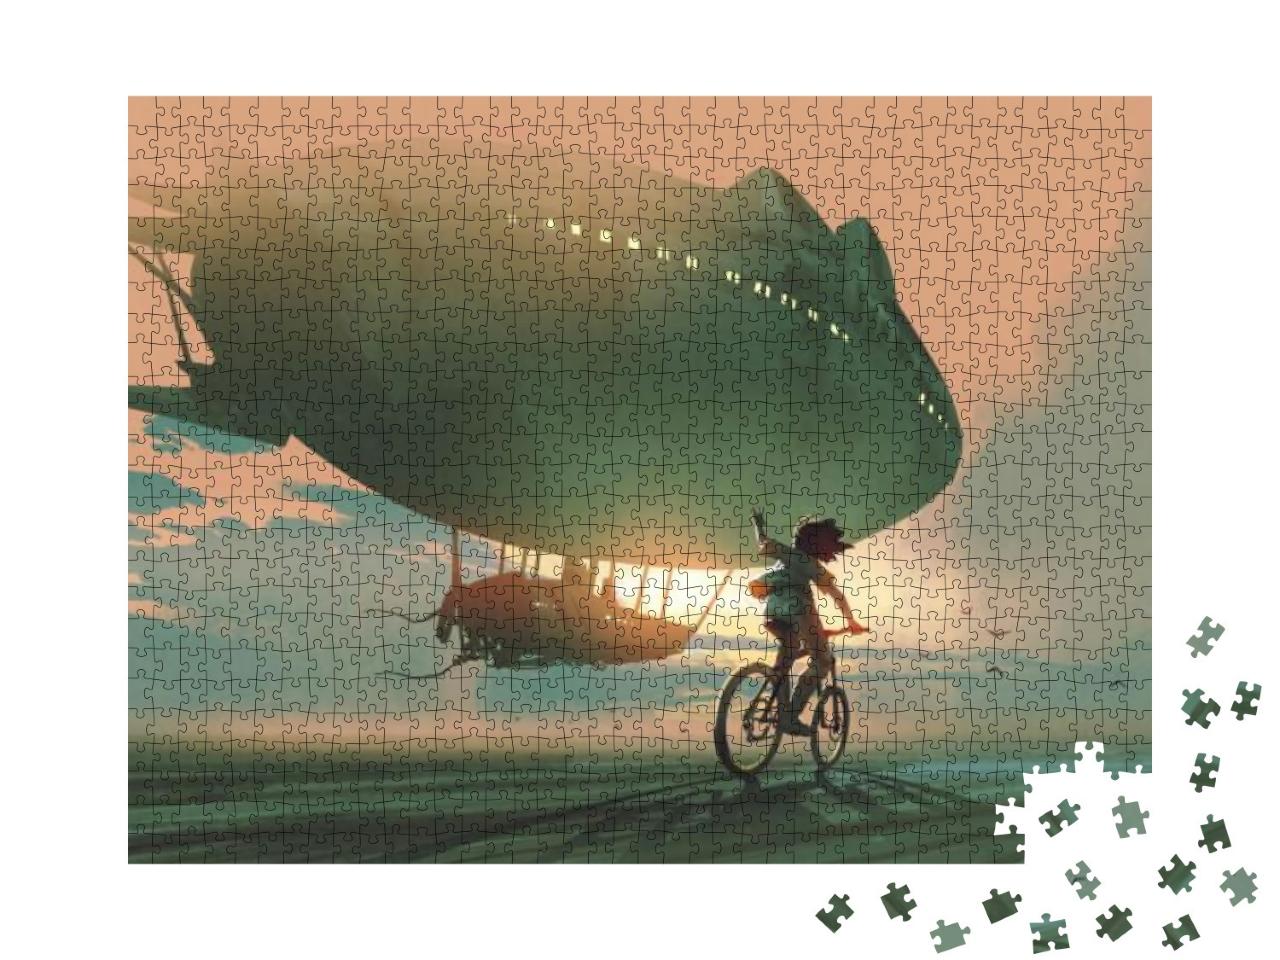 Kid Rides a Bicycle Waving Good Bye to the Airship At Sun... Jigsaw Puzzle with 1000 pieces